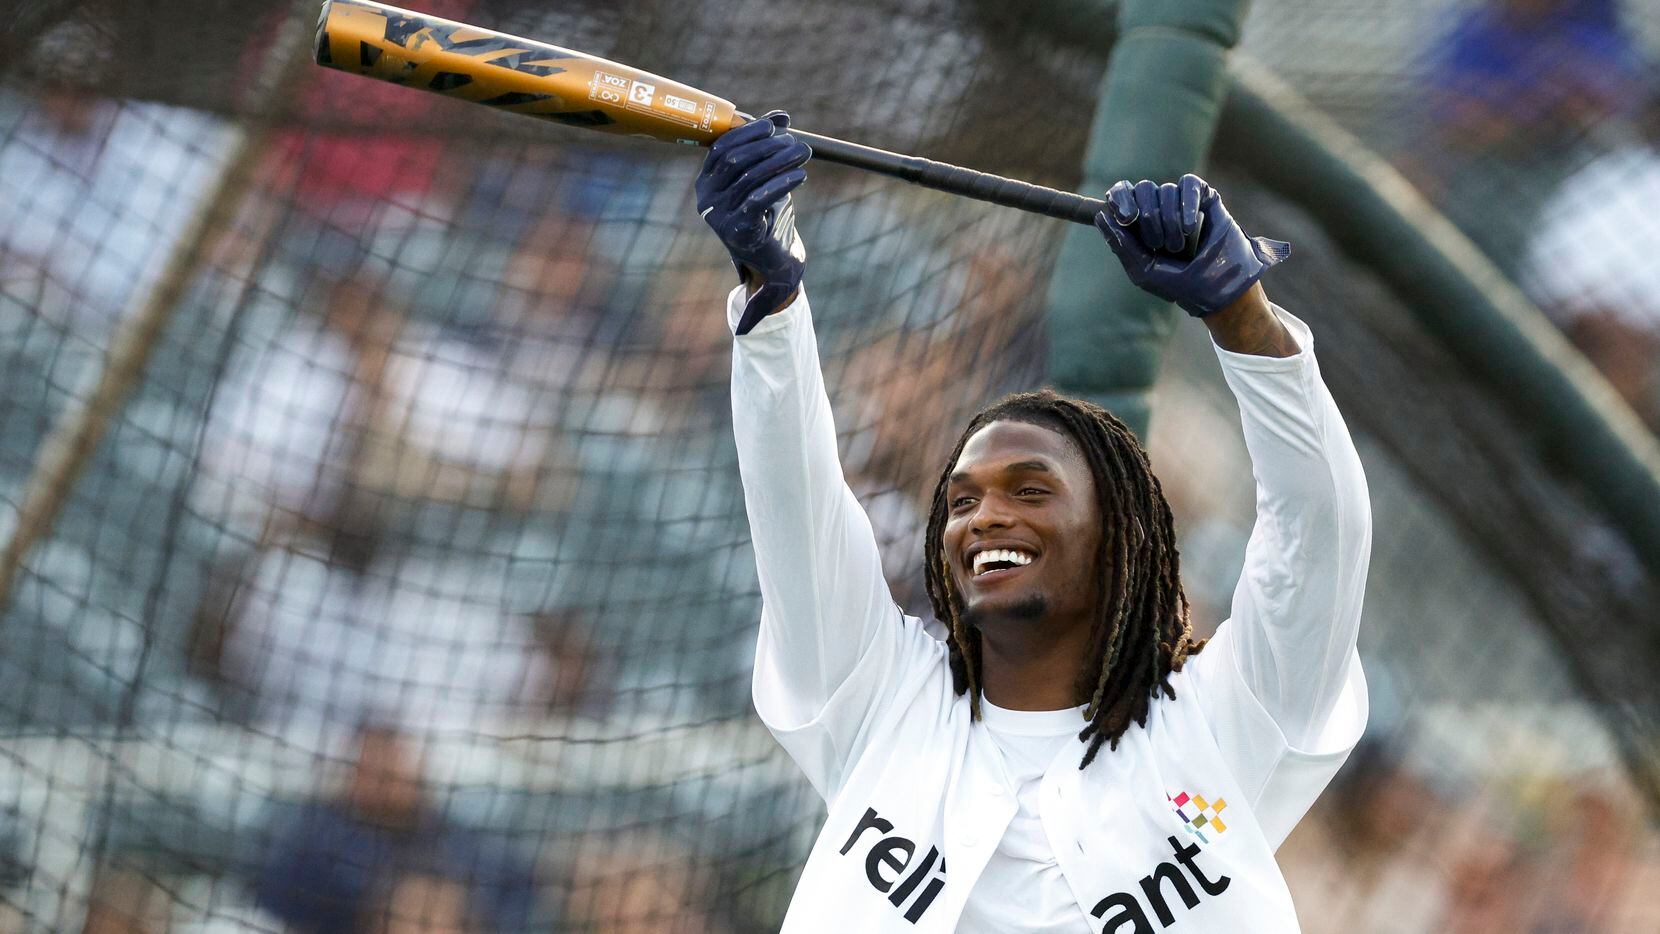 Dallas Cowboys wide receiver CeeDee Lamb raises his bat after hitting a home run during the...